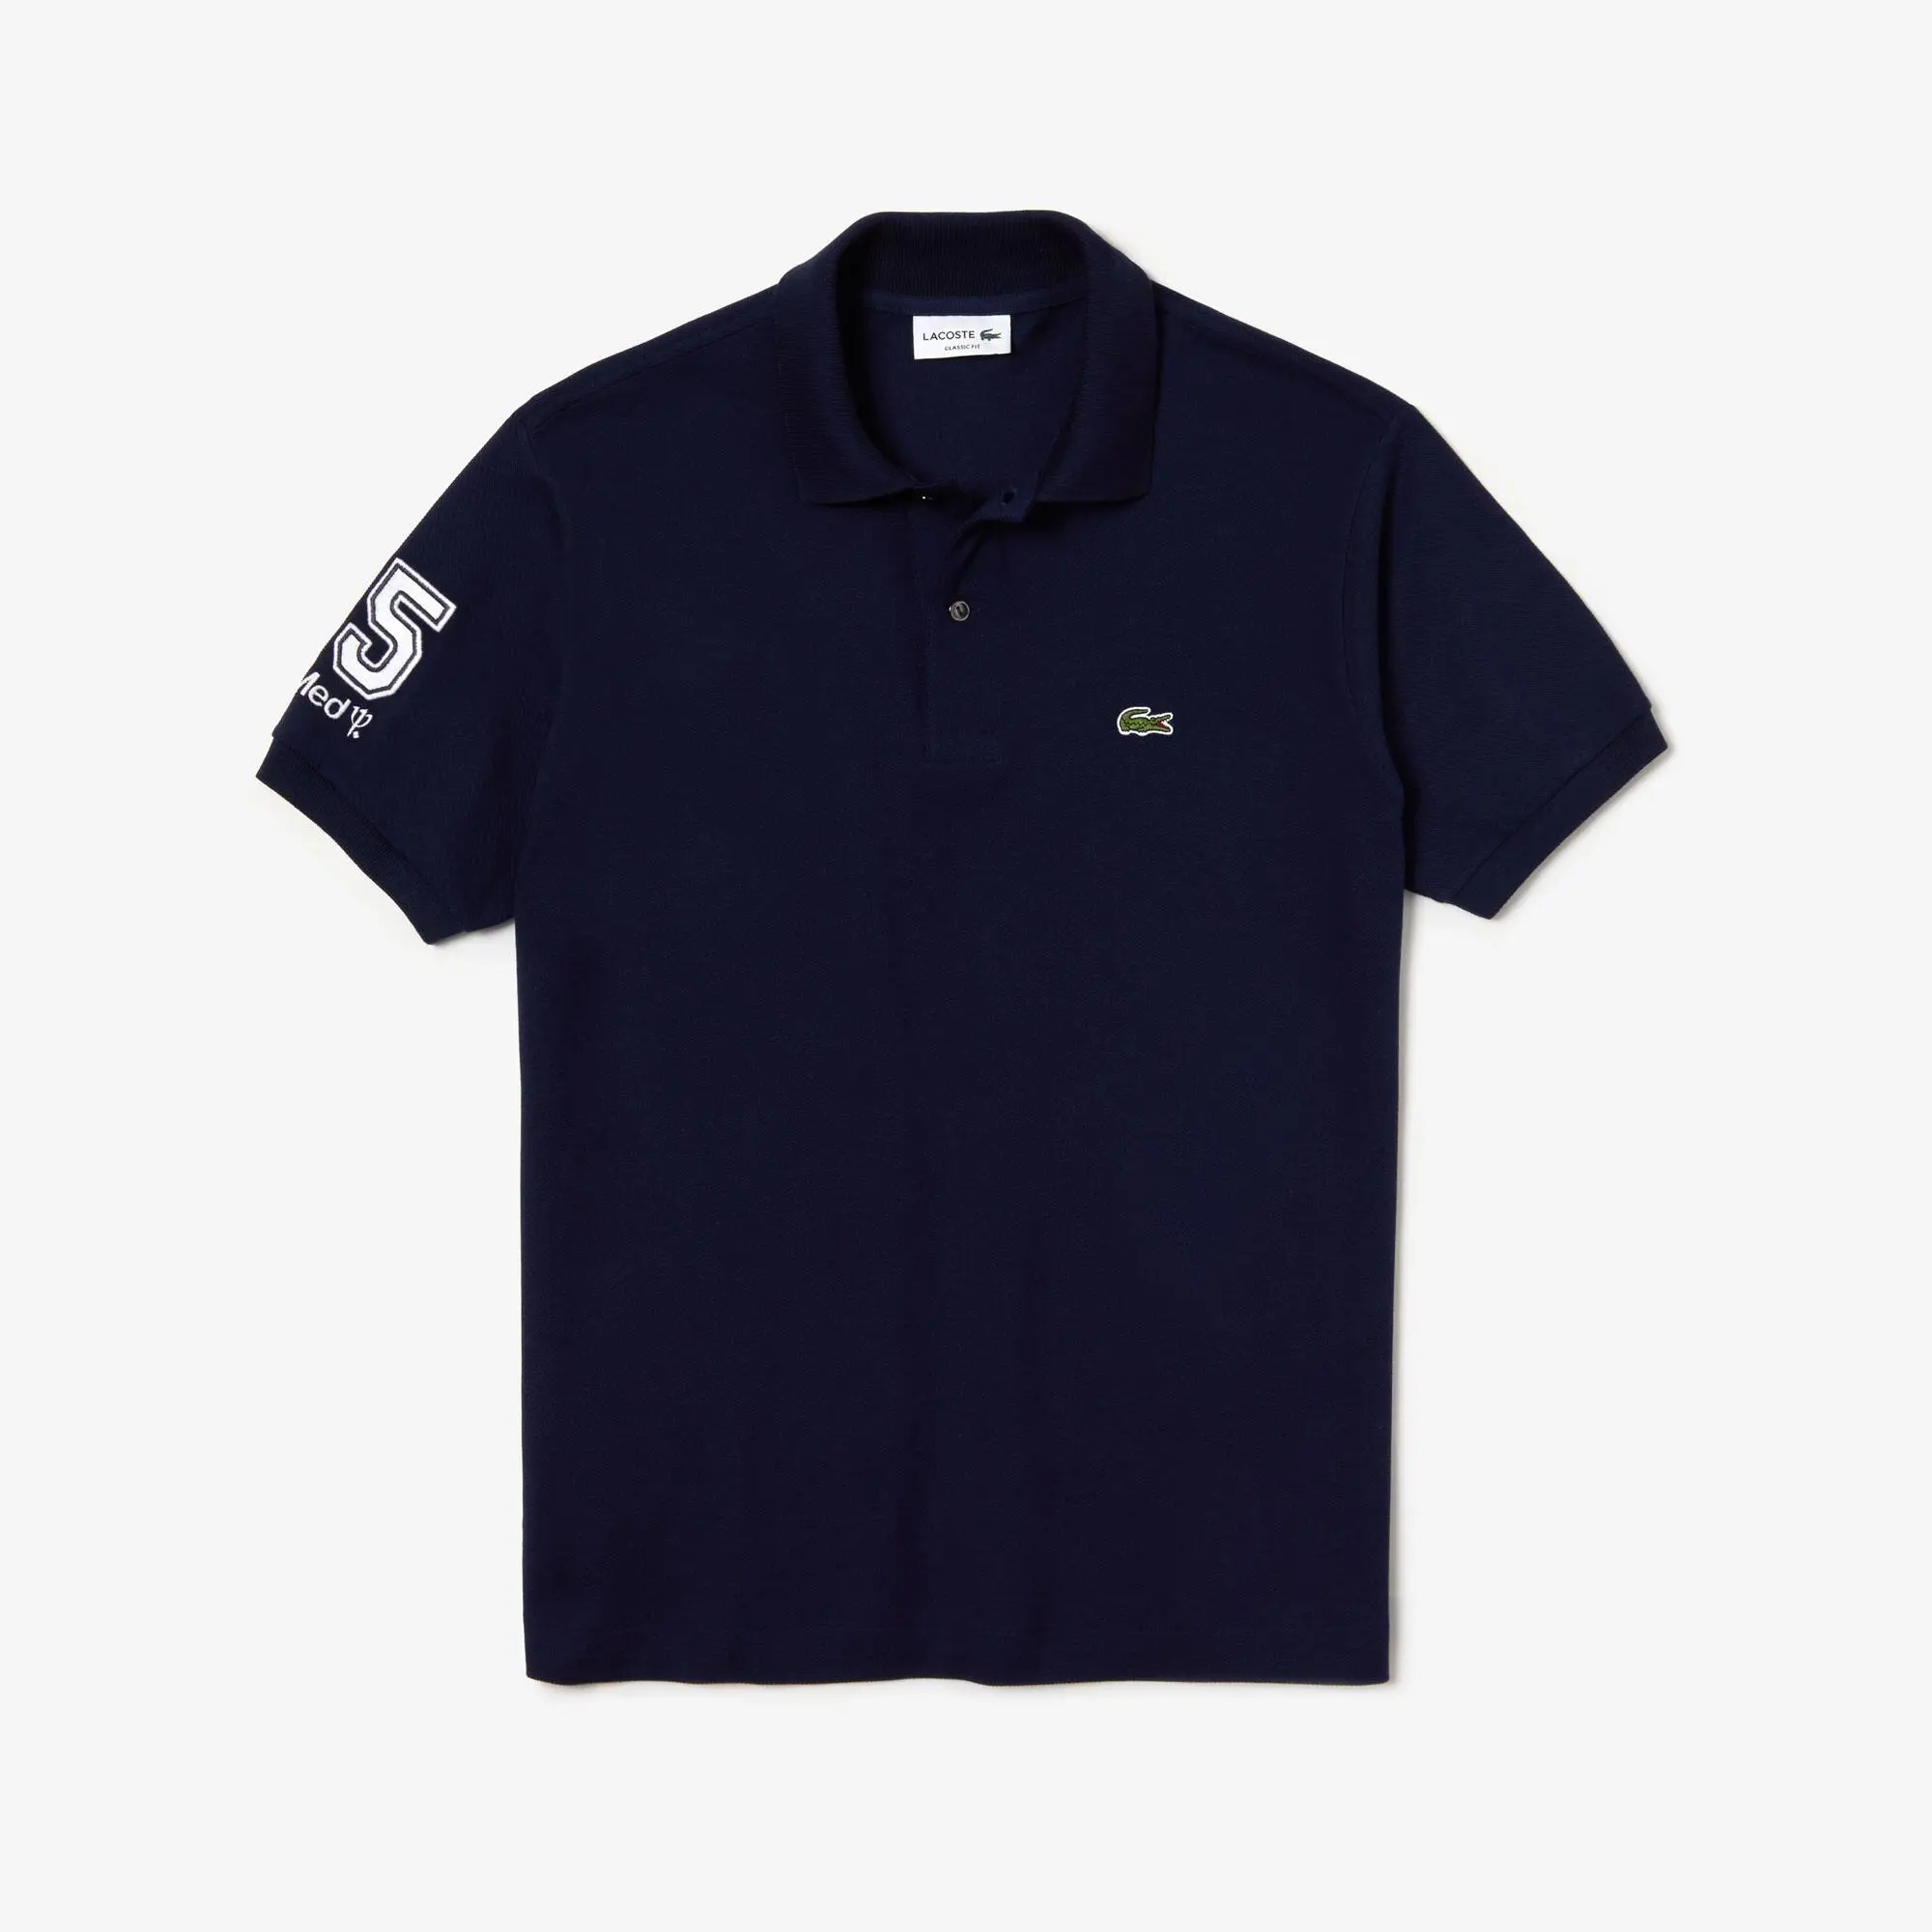 Lacoste Polo Lacoste L.12.12 - Club Med. 2